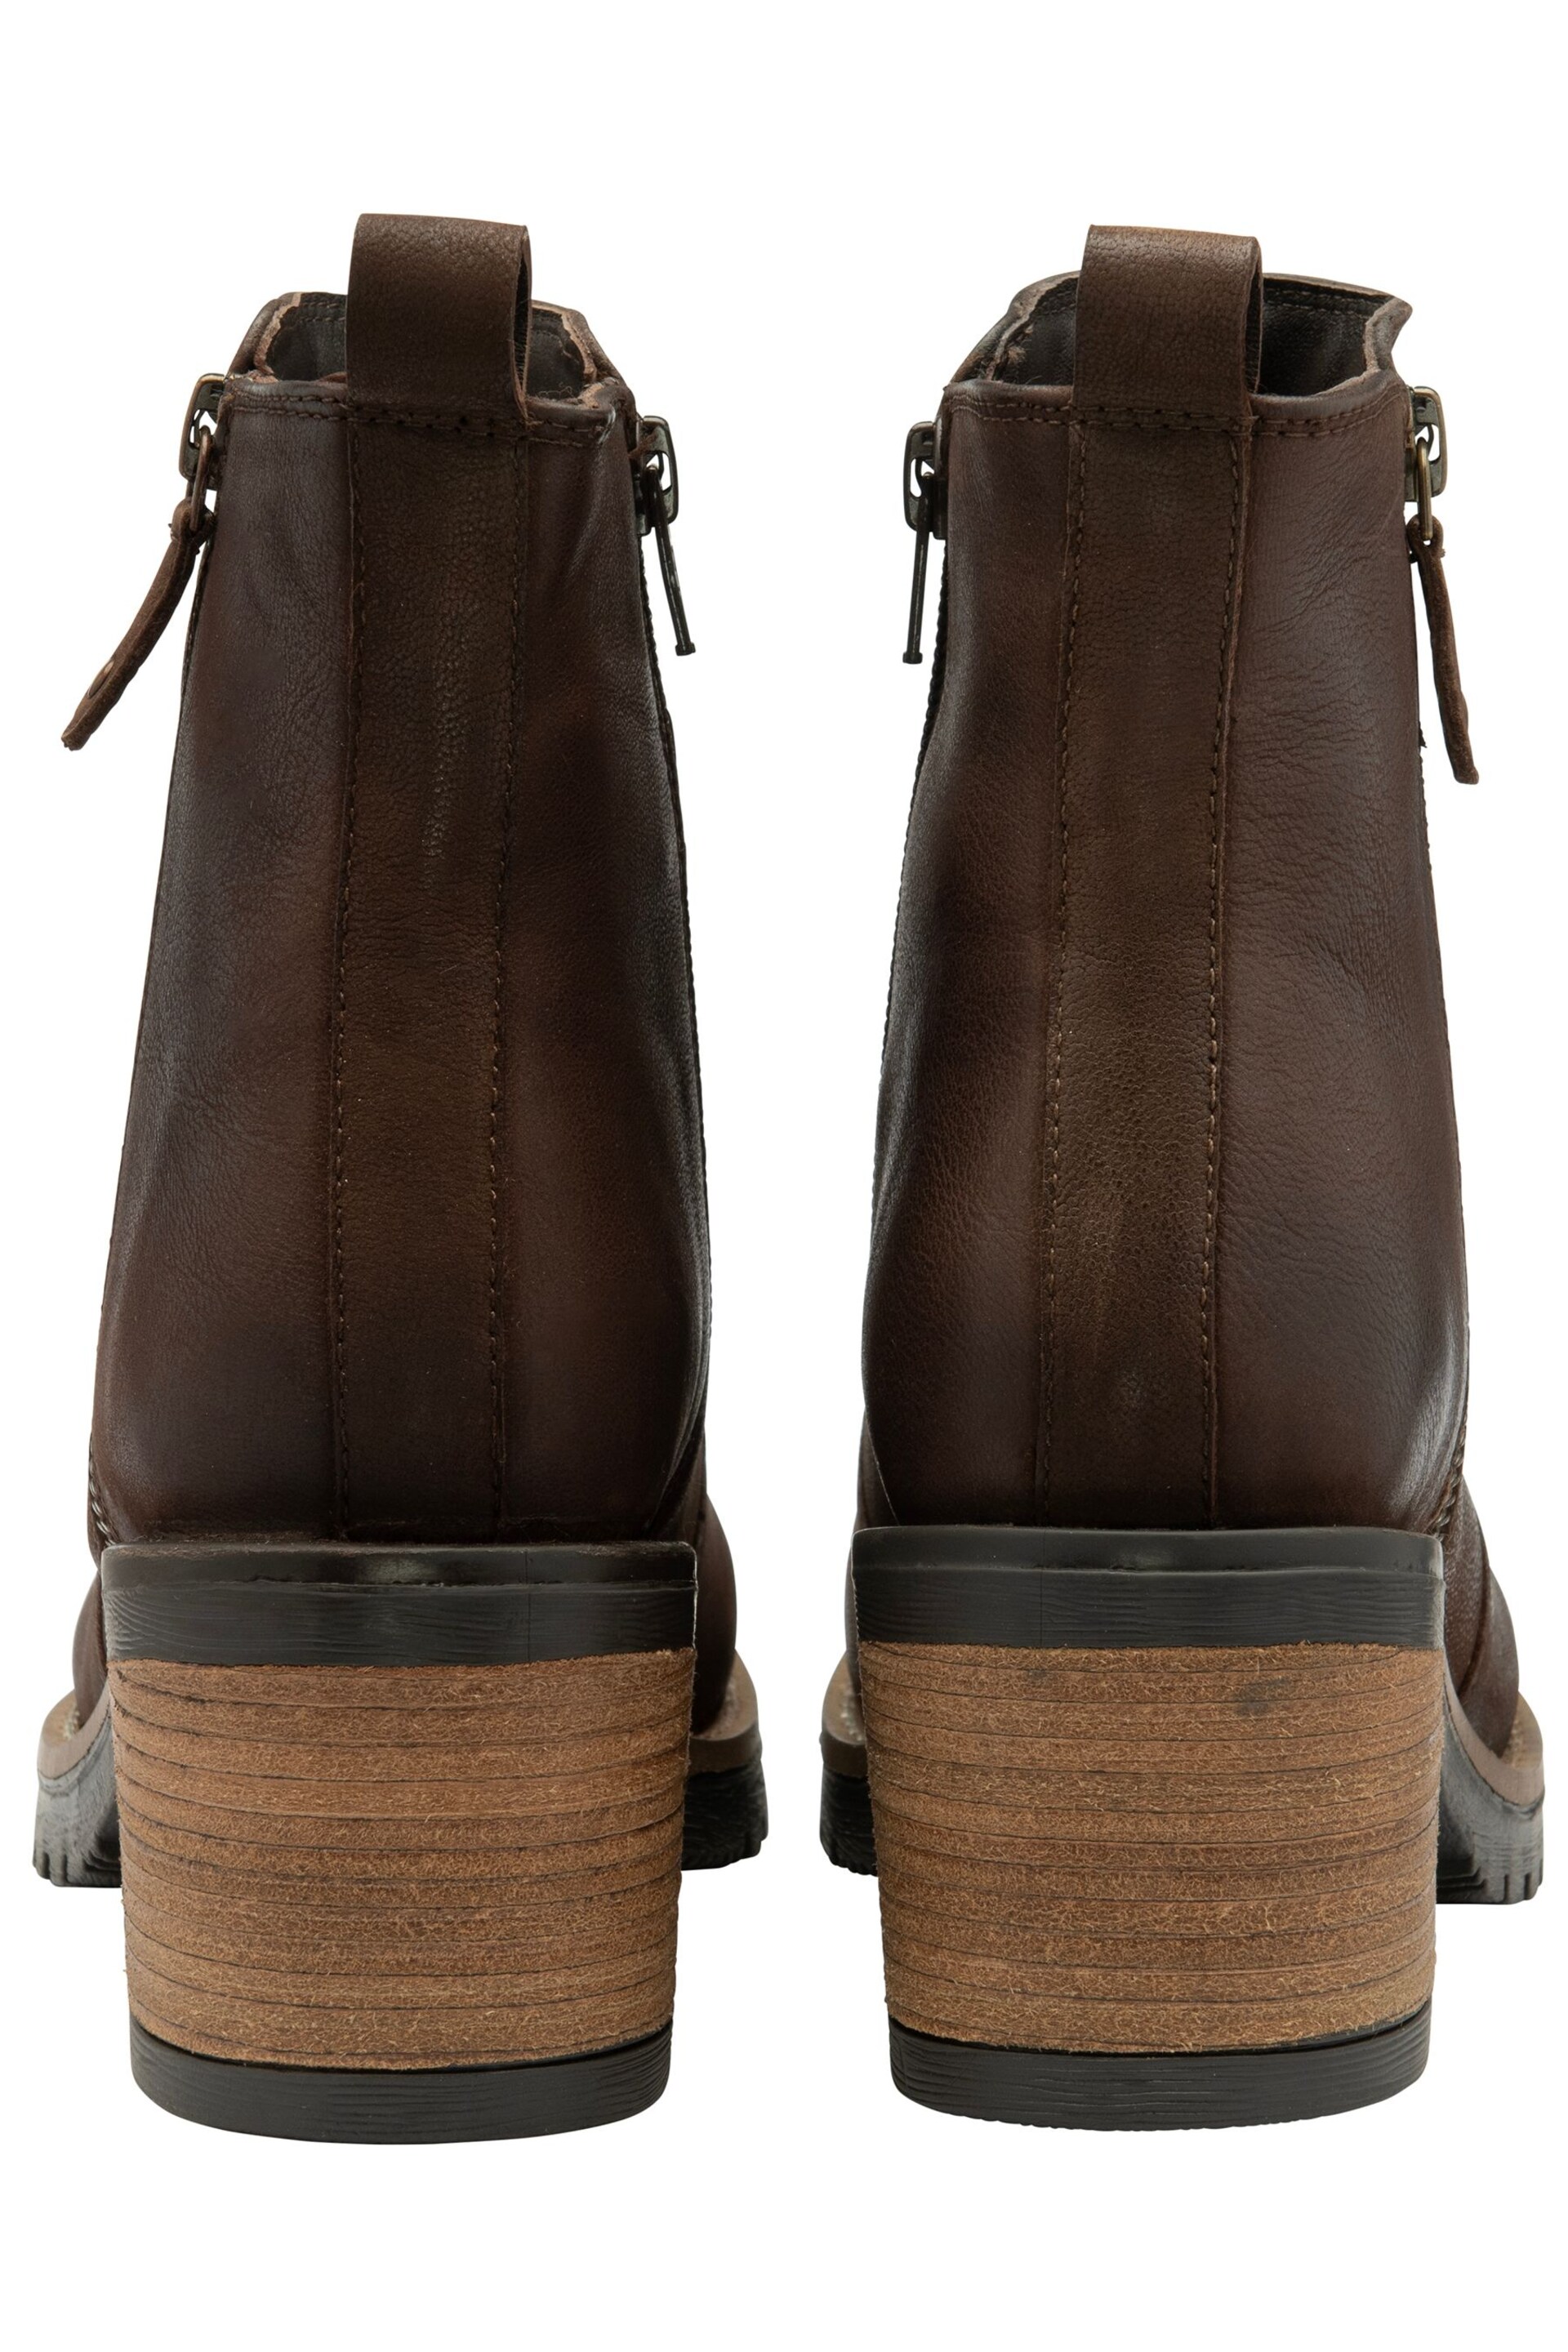 Ravel Brown Leather Cleated Sole Ankle Boots - Image 3 of 4